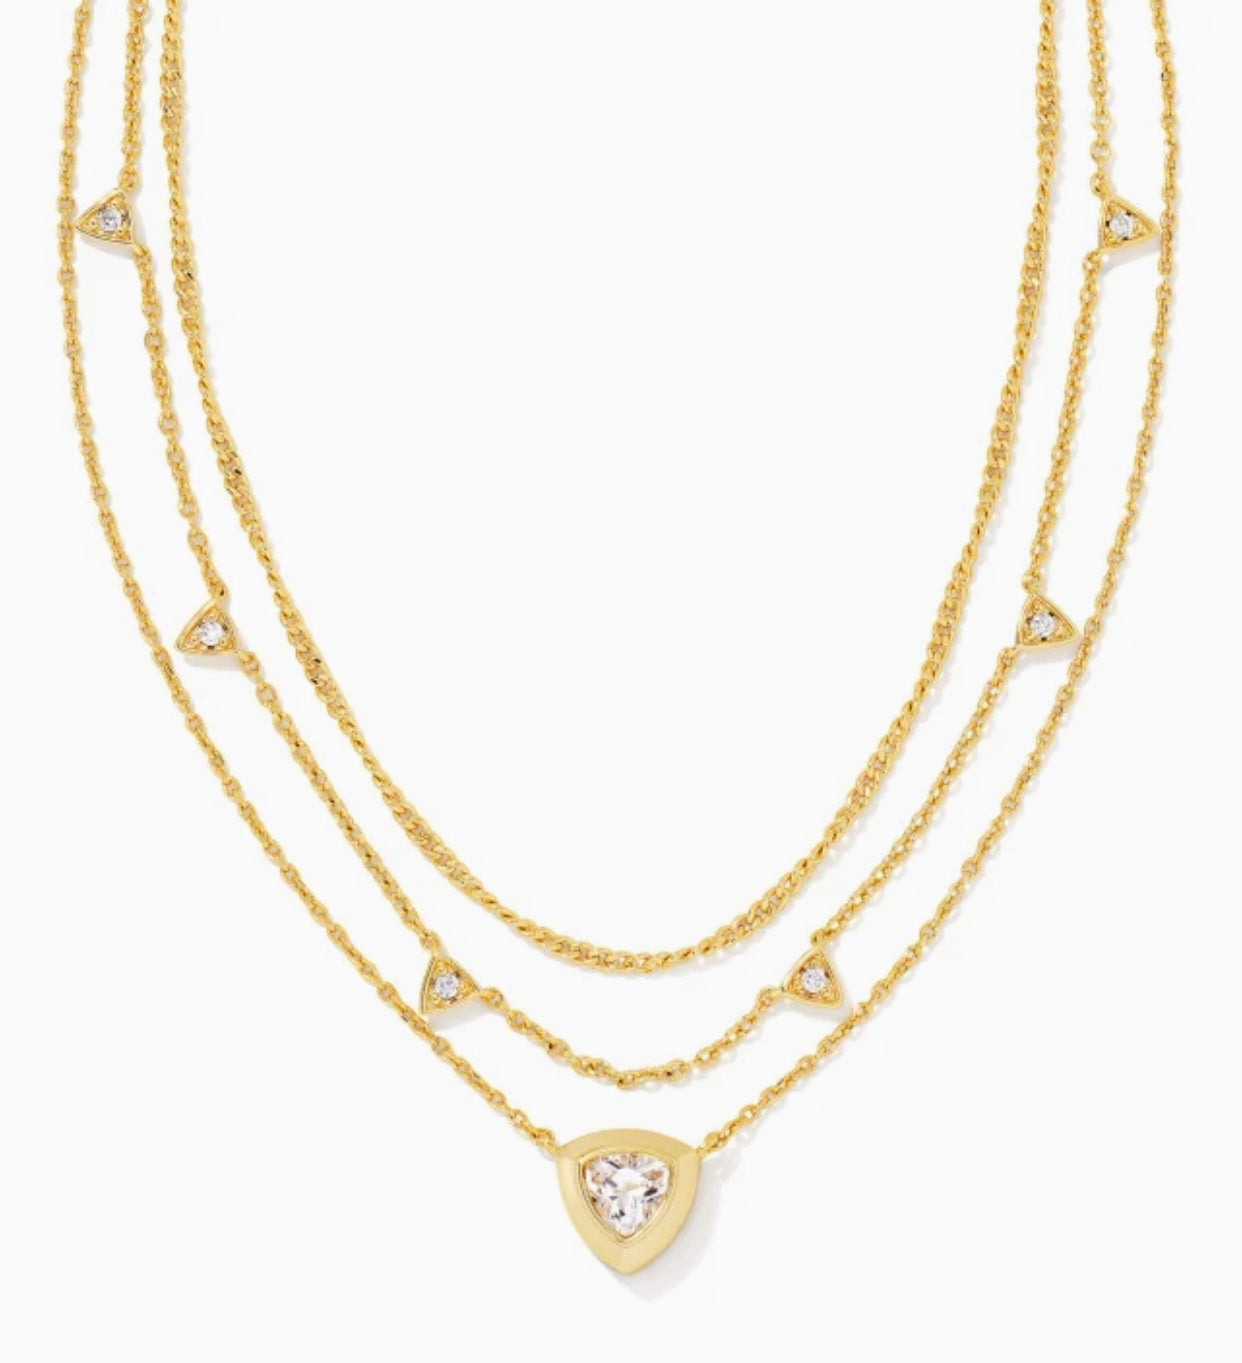 Arden White Crystal Multi Strand Gold Necklace